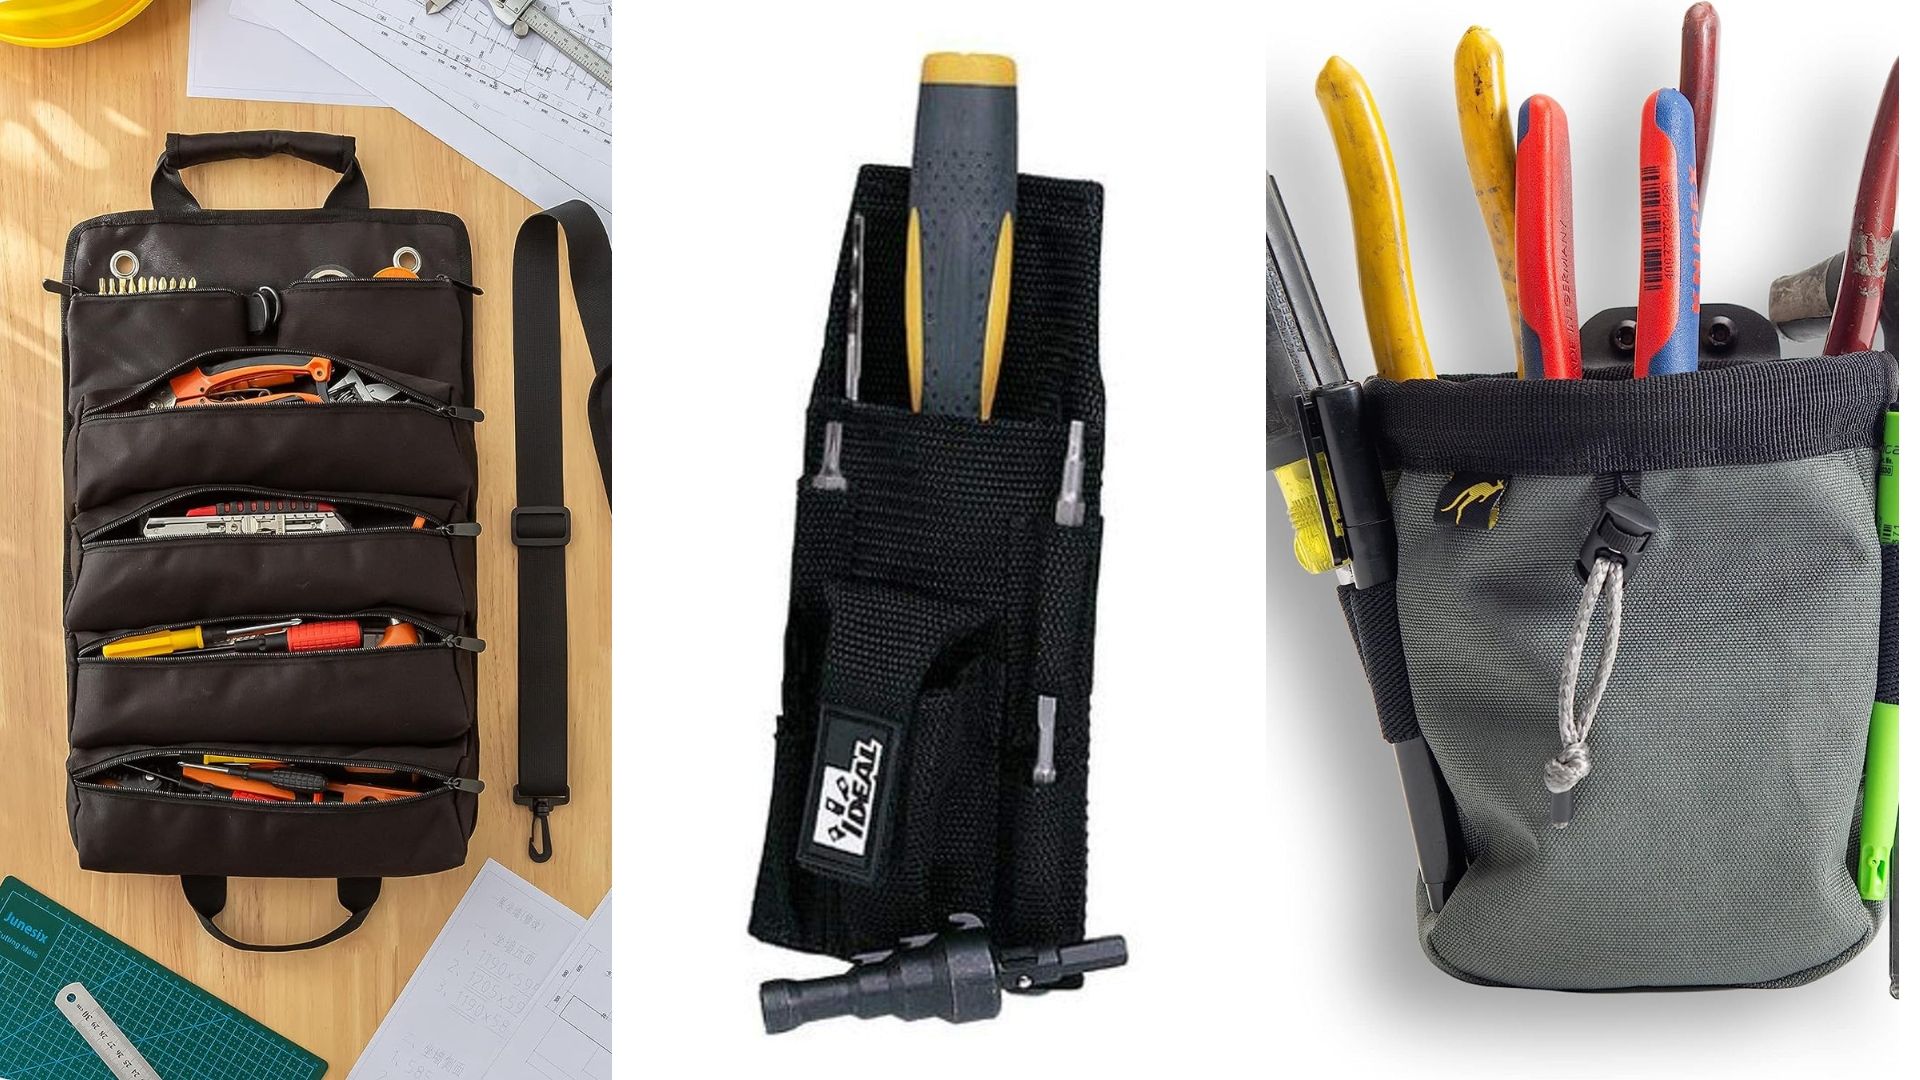 3 types of simple tool pouches.